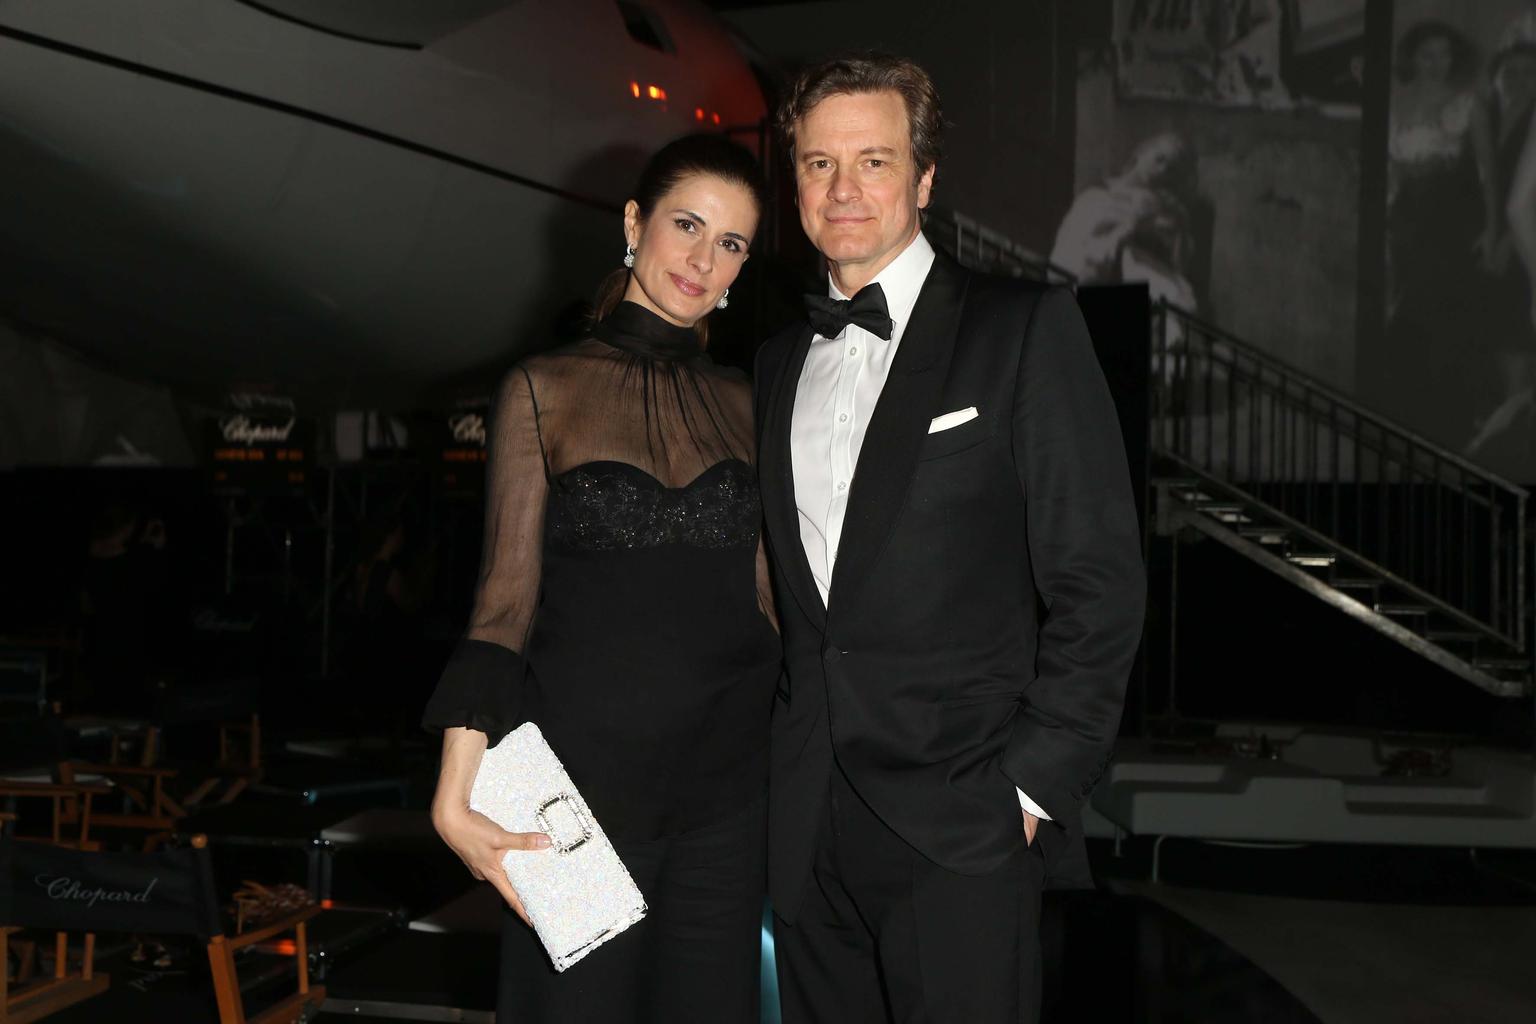 Livia Firth, who continues to collaborate with Chopard on its ethical Green Carpet Collection of jewels, attended the Backstage party with husband Colin